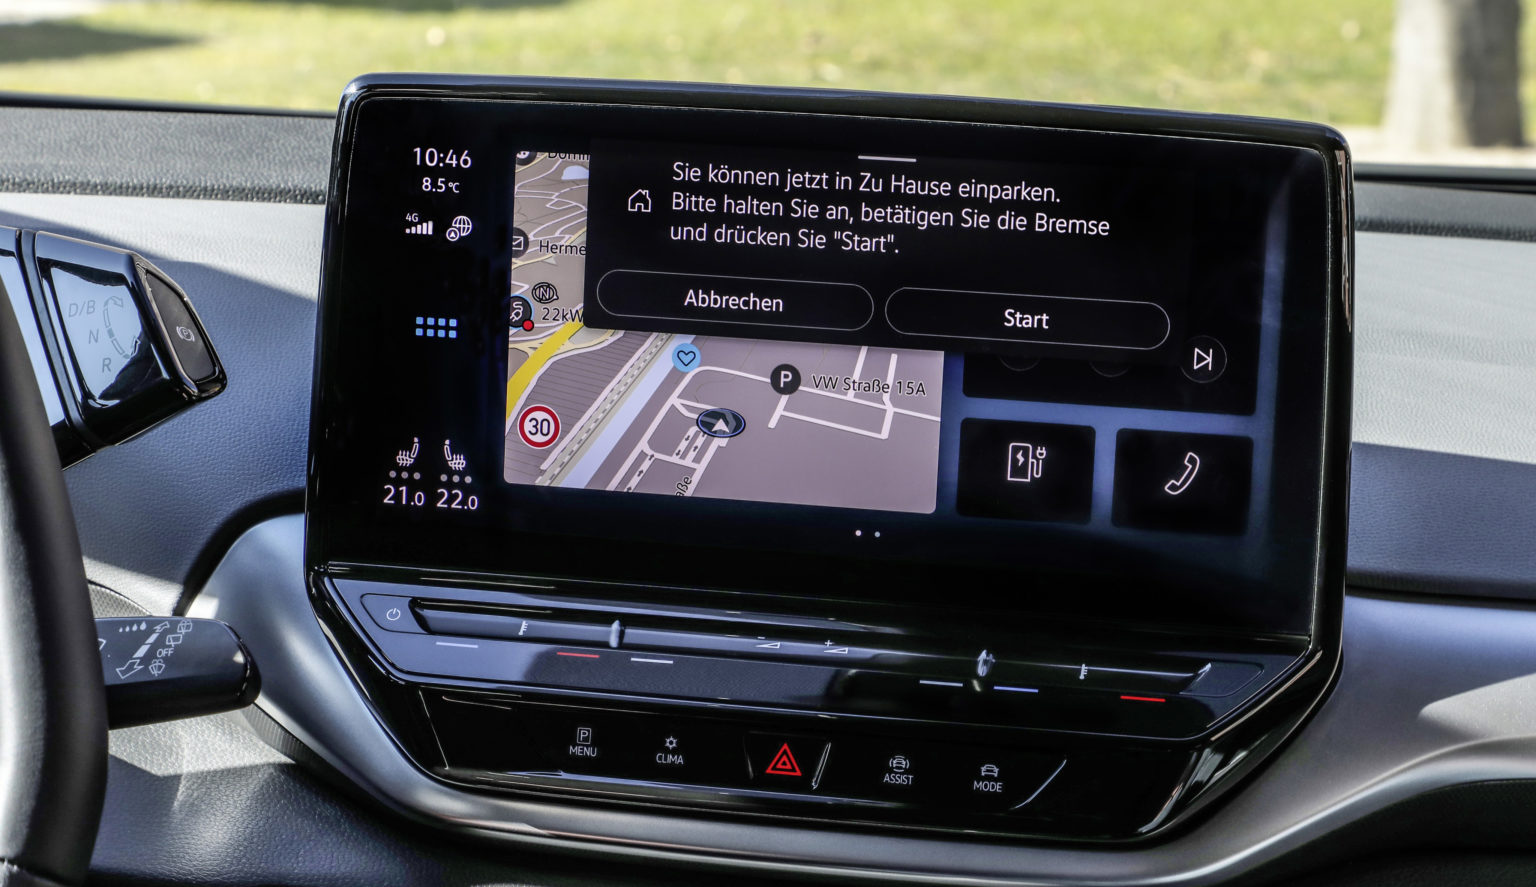 Park Assist Plus with memory function – parking mode memory recognized